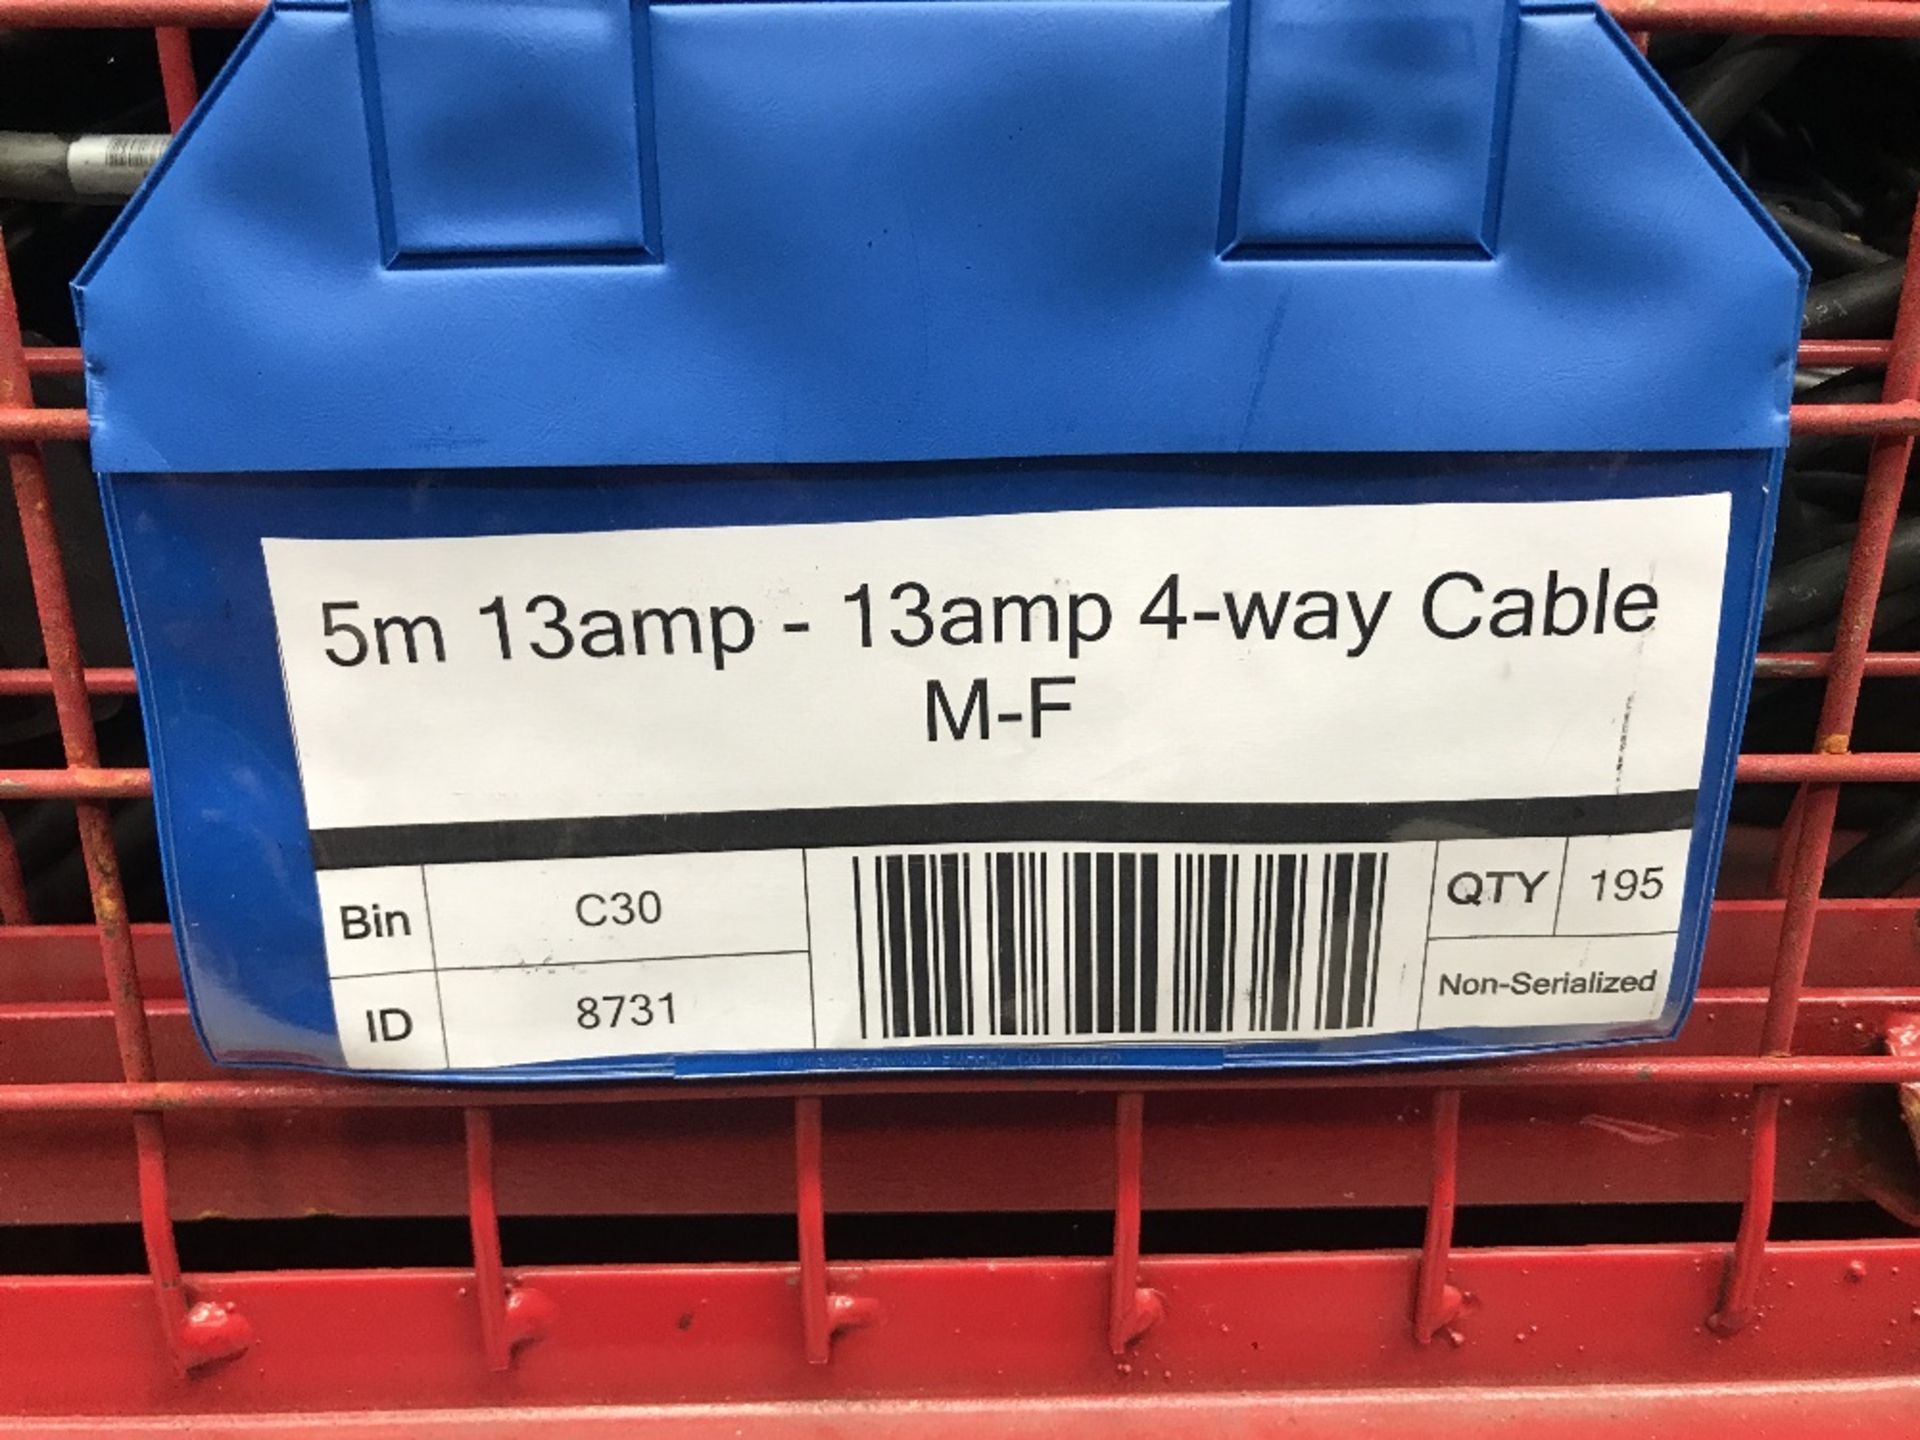 Large Quantity of 5m 13amp-13amp 4-way Cable M-F with Steel Fabricated Stillage - Image 2 of 2